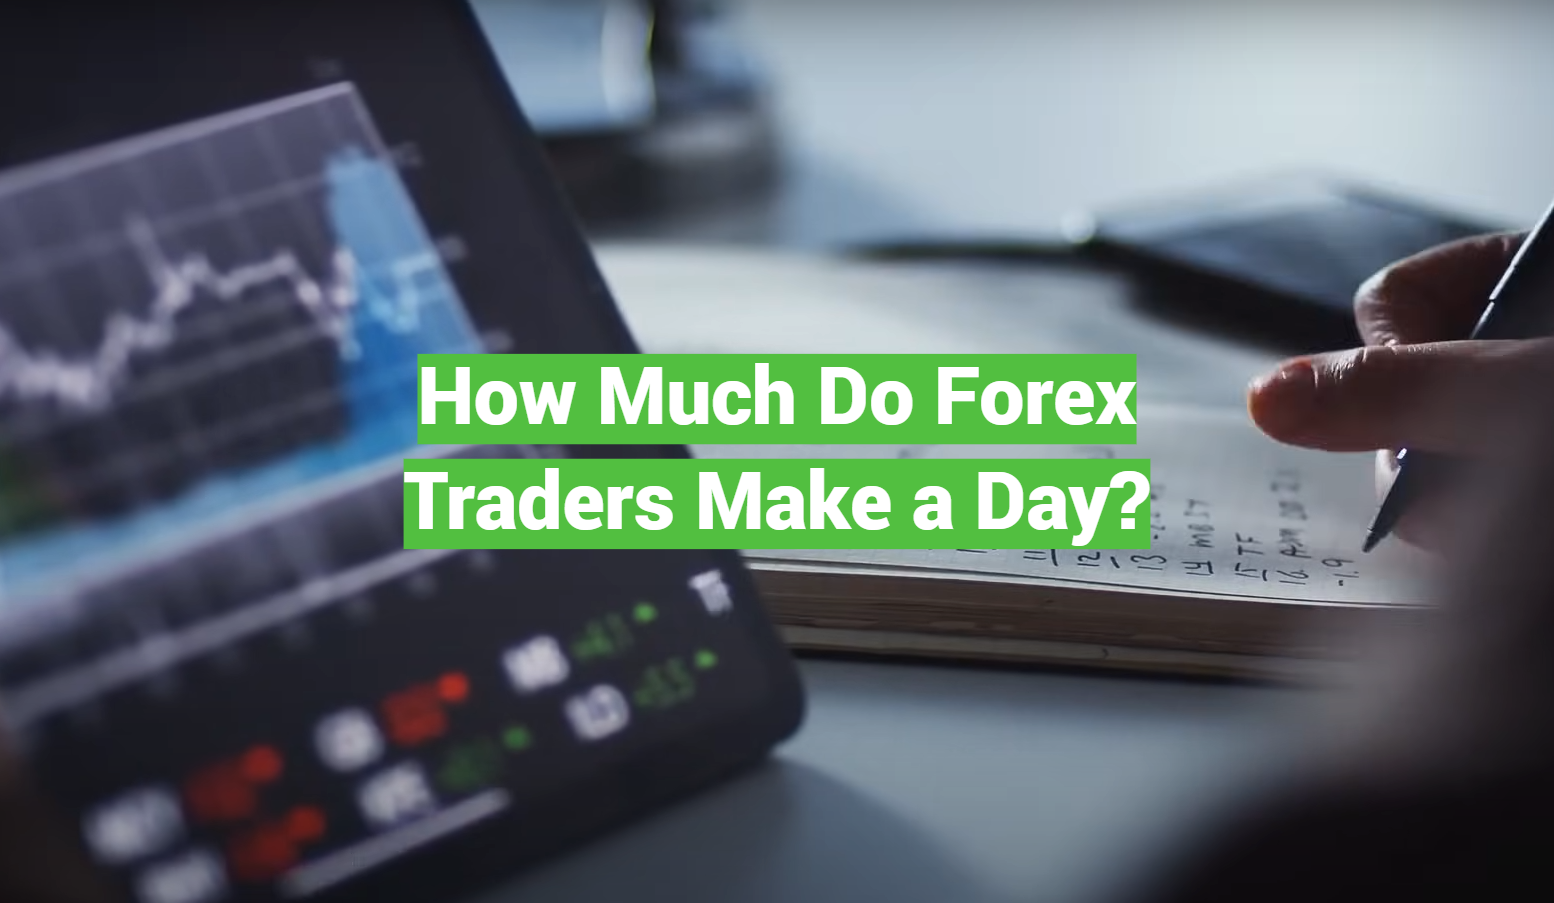 How Much Do Forex Traders Make a Day?